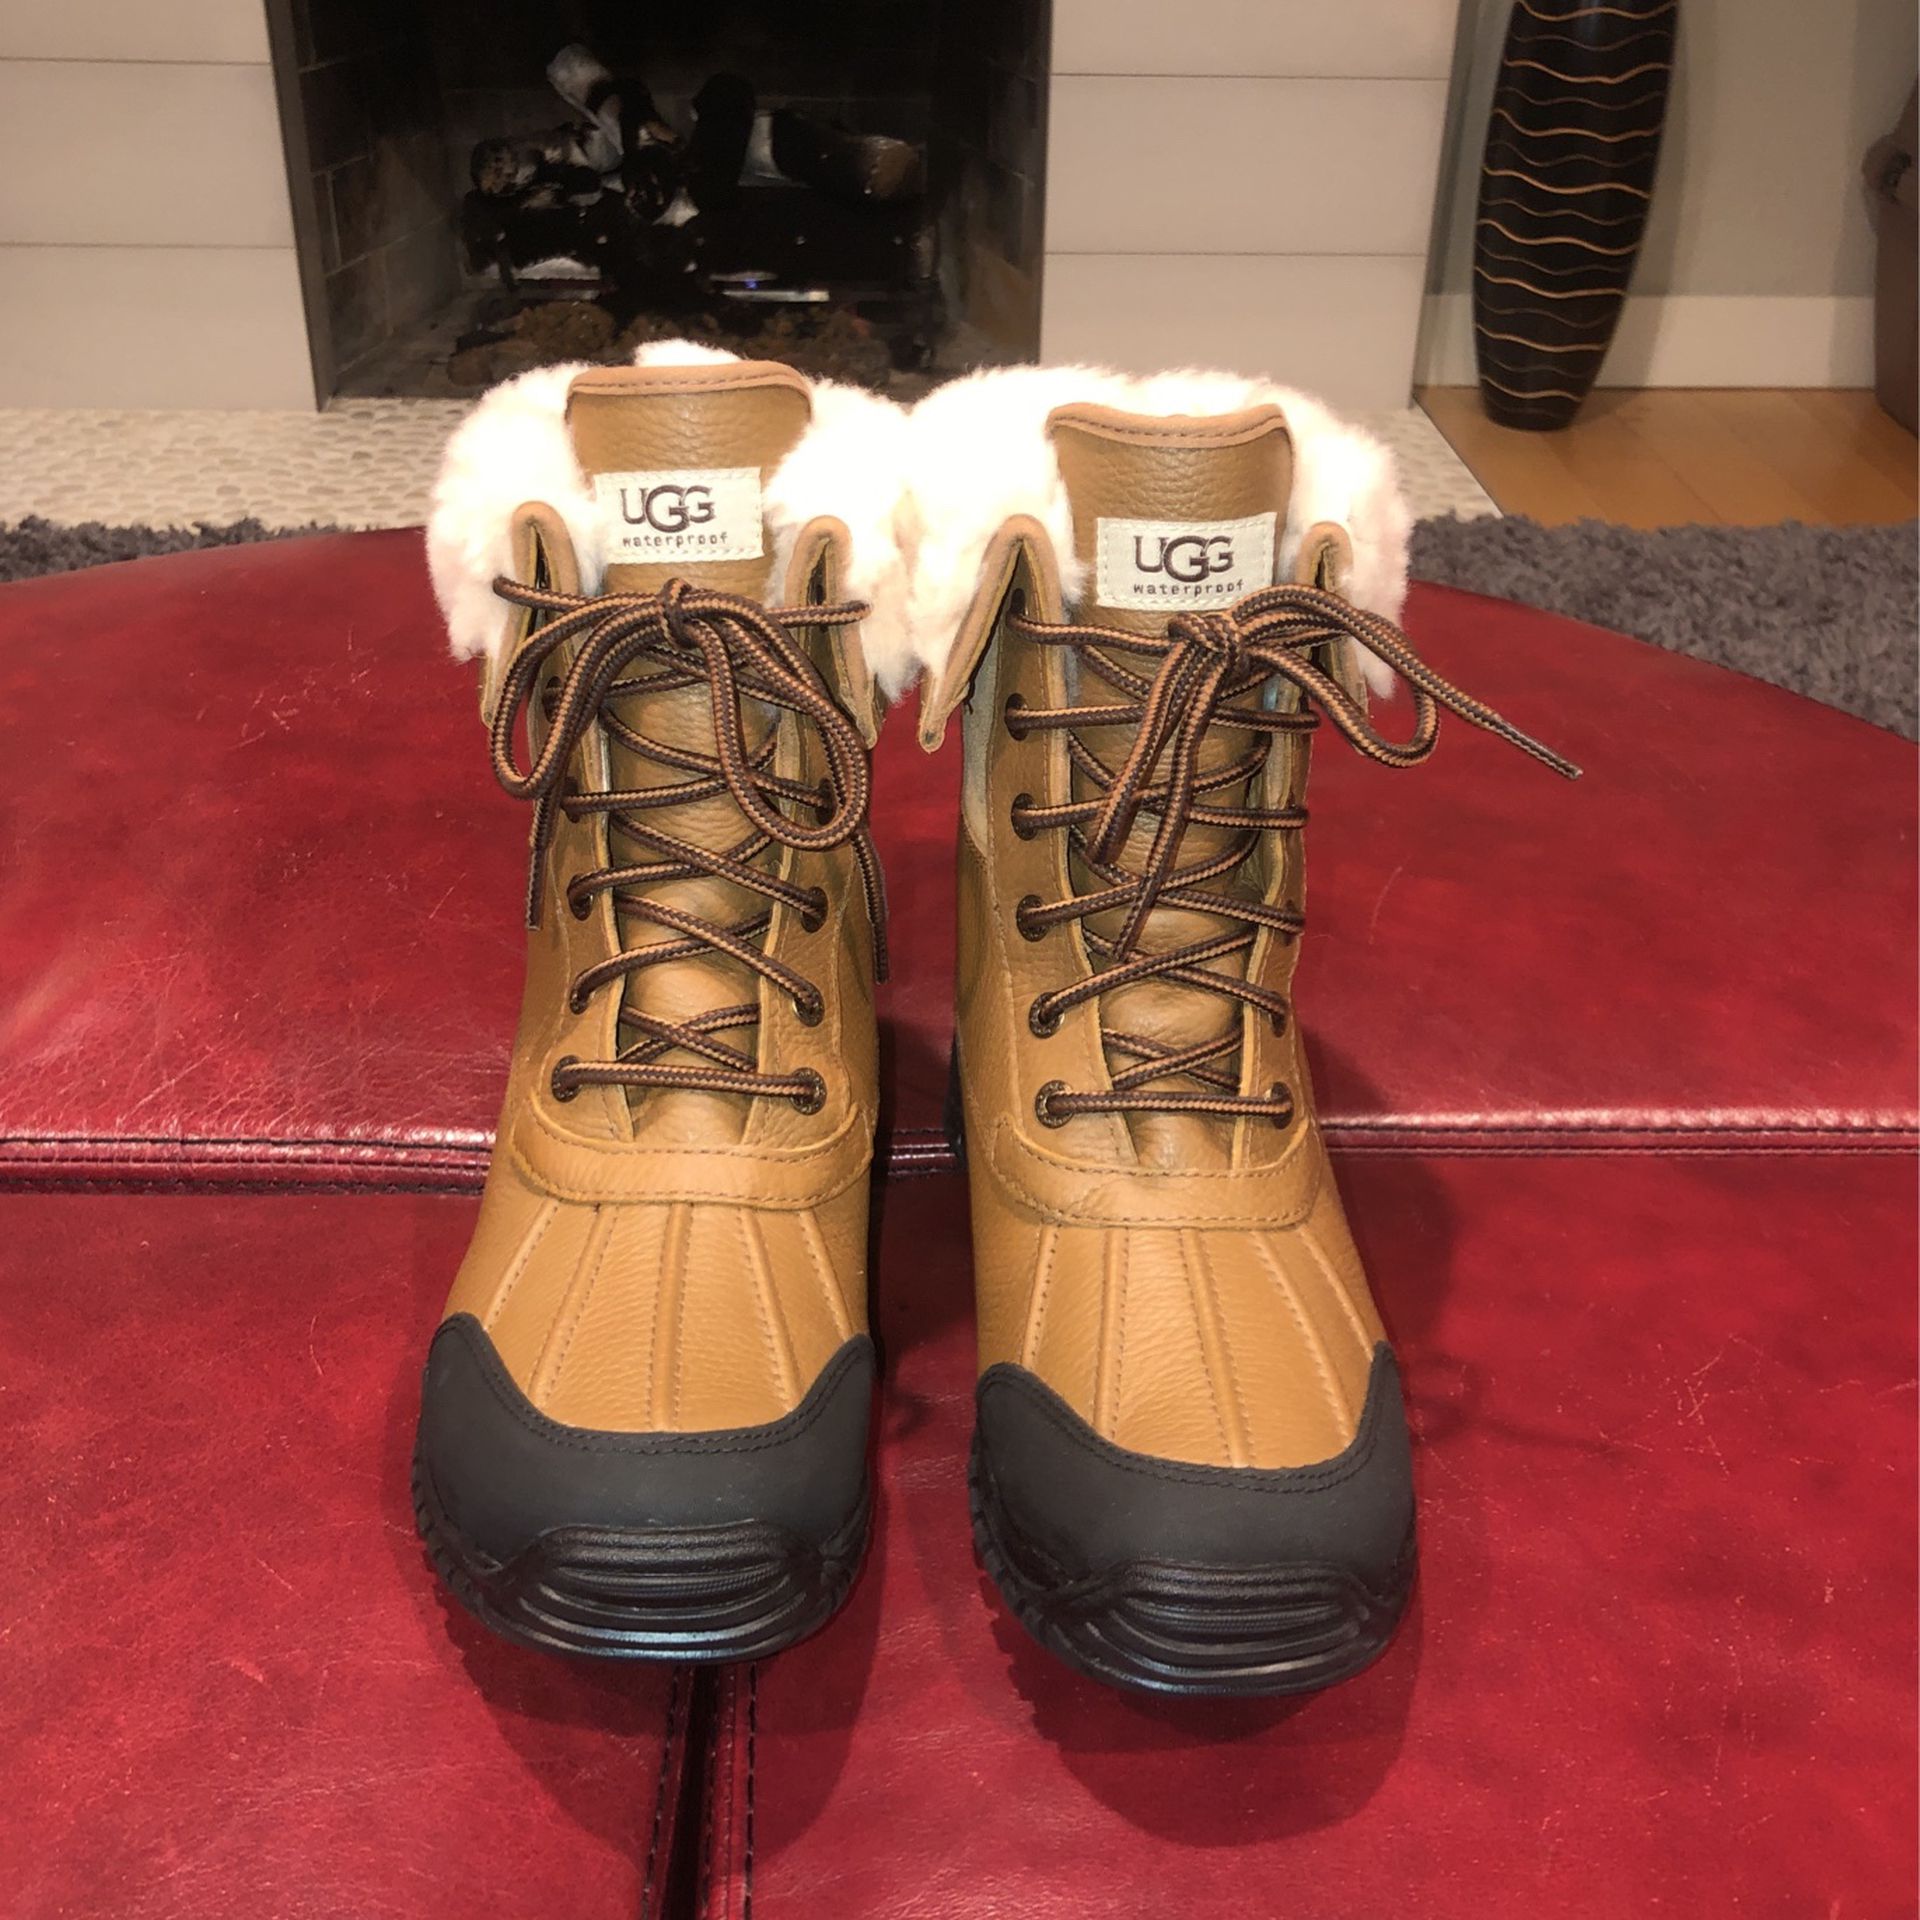 Ugg’s Boots Women’s Size:8